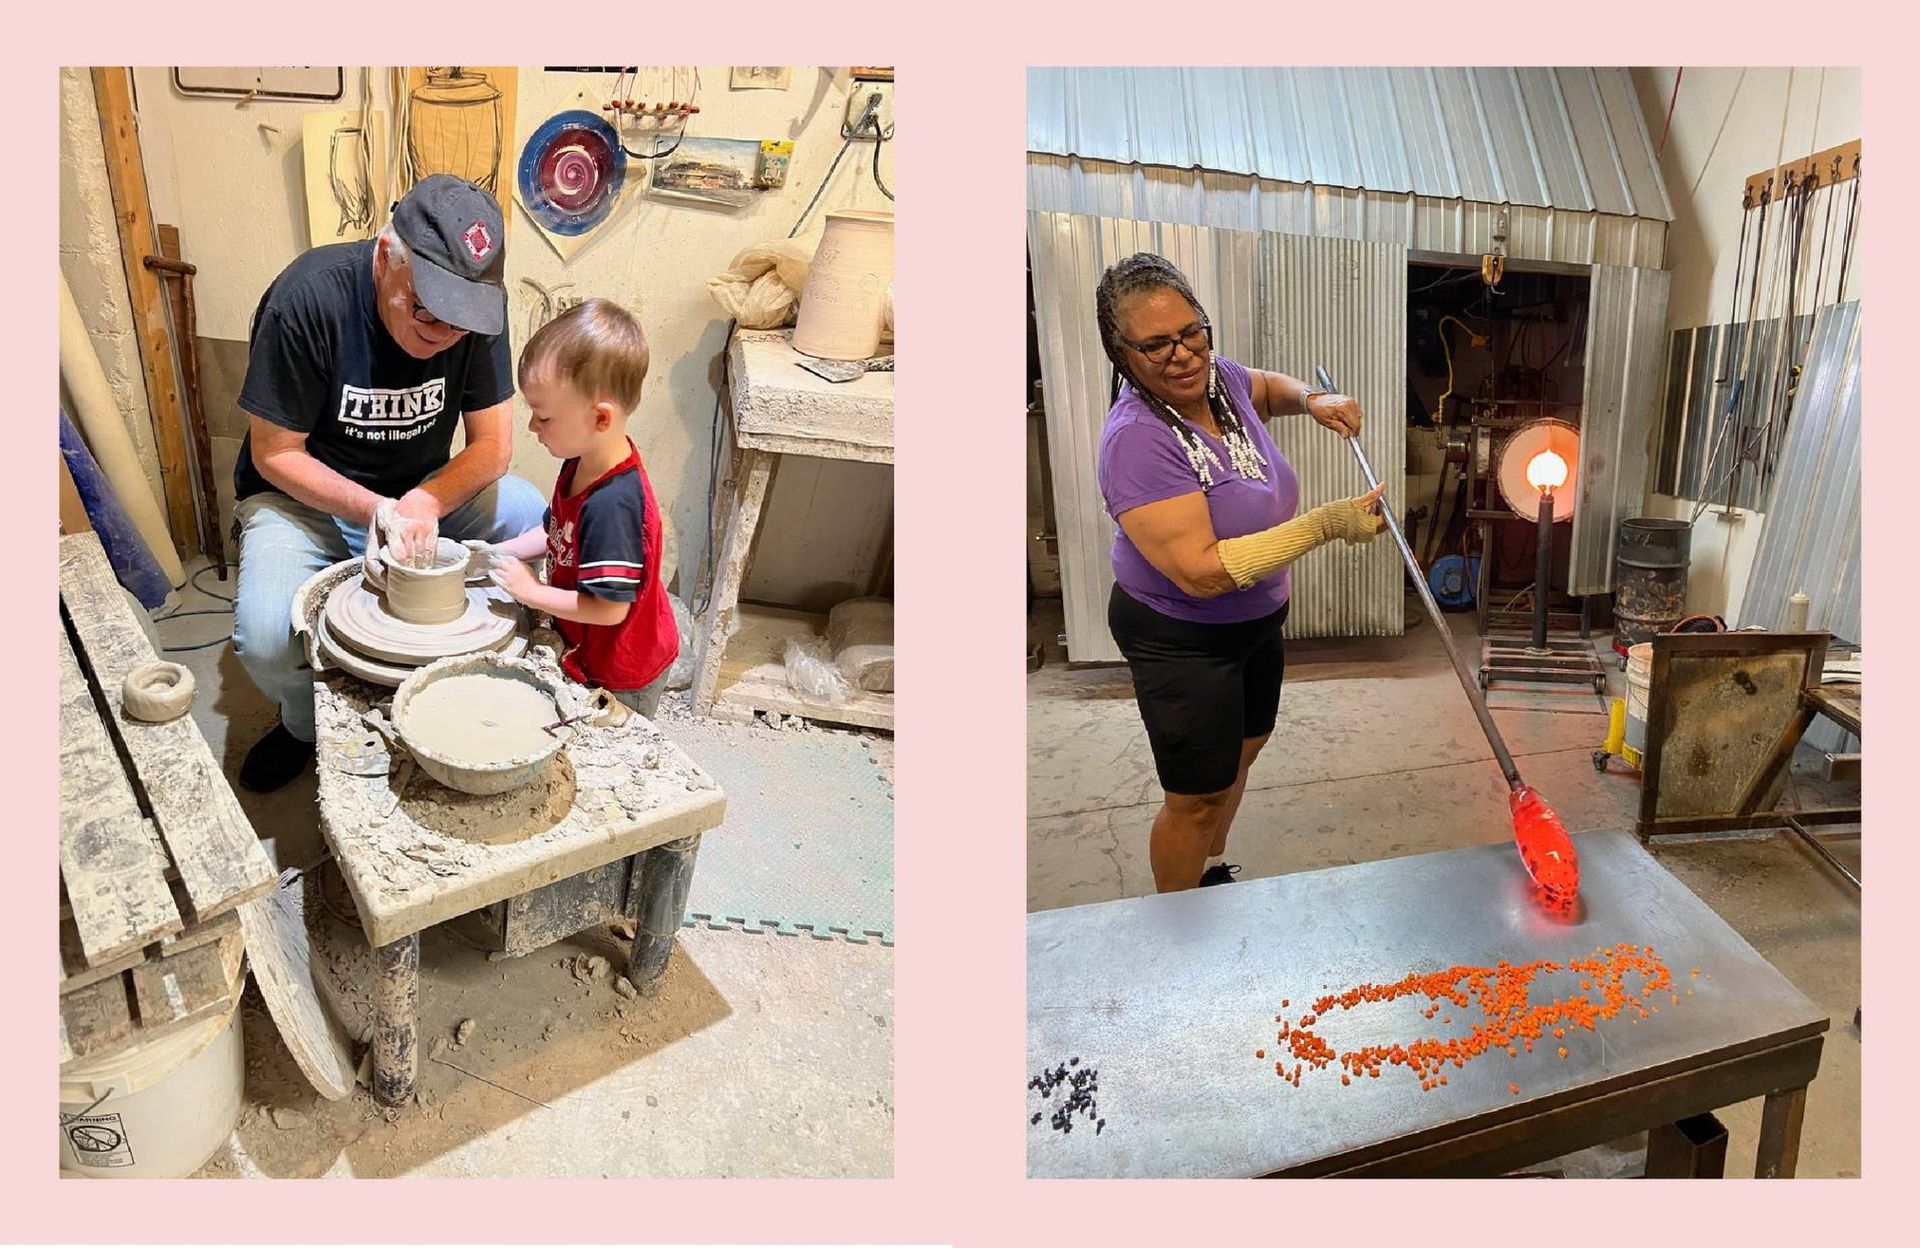 A photo collage of a man doing pottery with a toddler and a woman working on a glass blowing project. Next Avenue